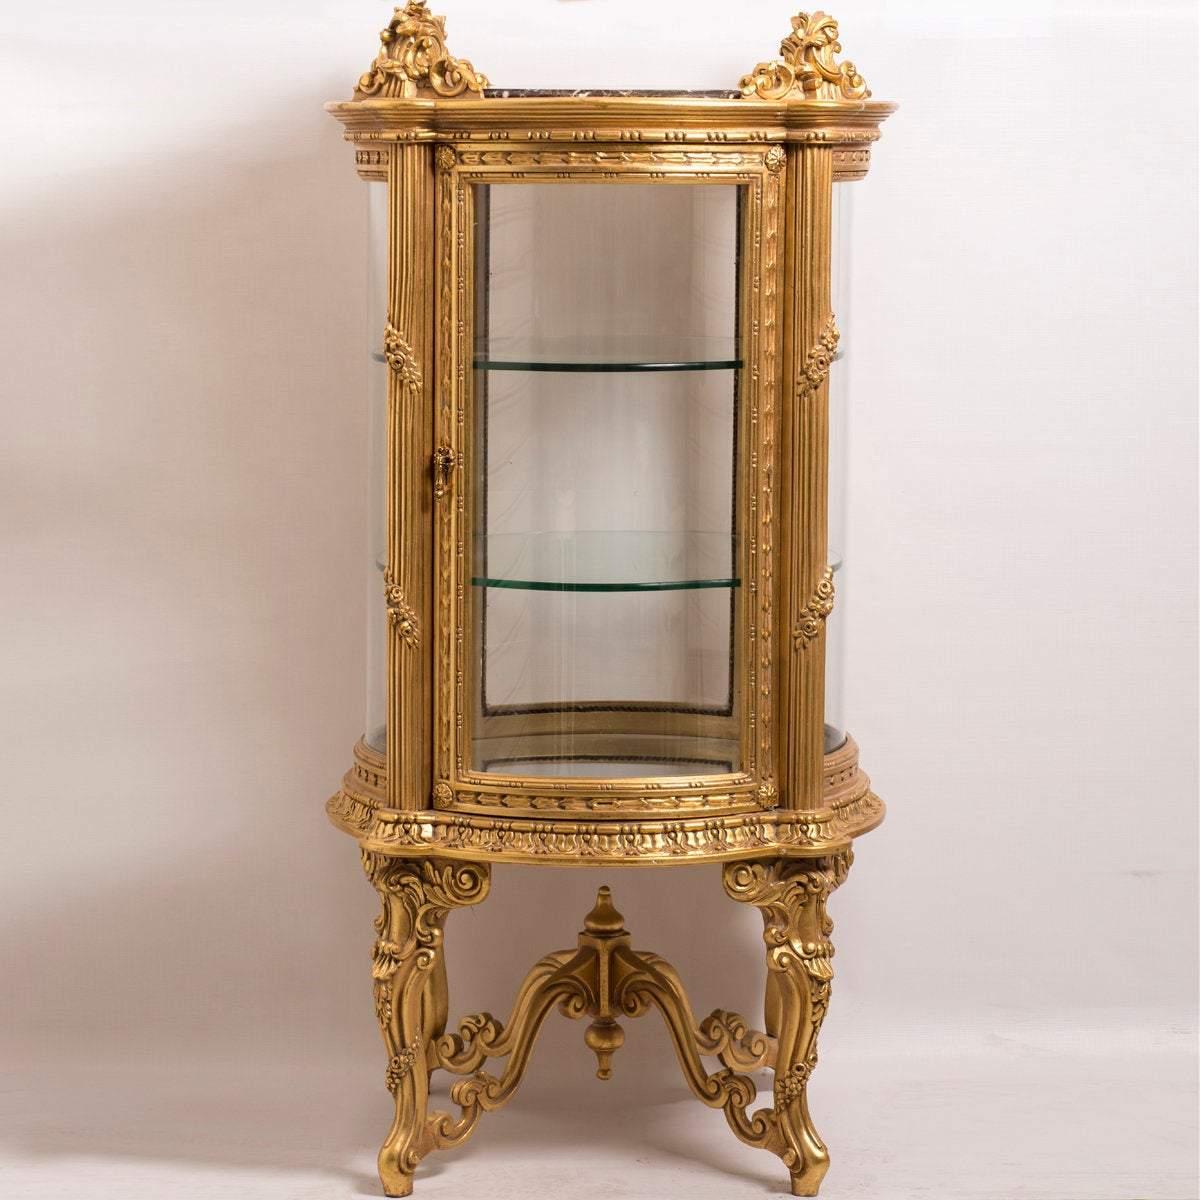 A beautiful Louis XV gilded vitrine, 20th century.
The magnificent Louis XV gold gilded vitrine is inspired by the French furniture style of Louis XV. It will amaze you with how beautiful it is. The 2 shelves Vitrine is made of natural beechwood